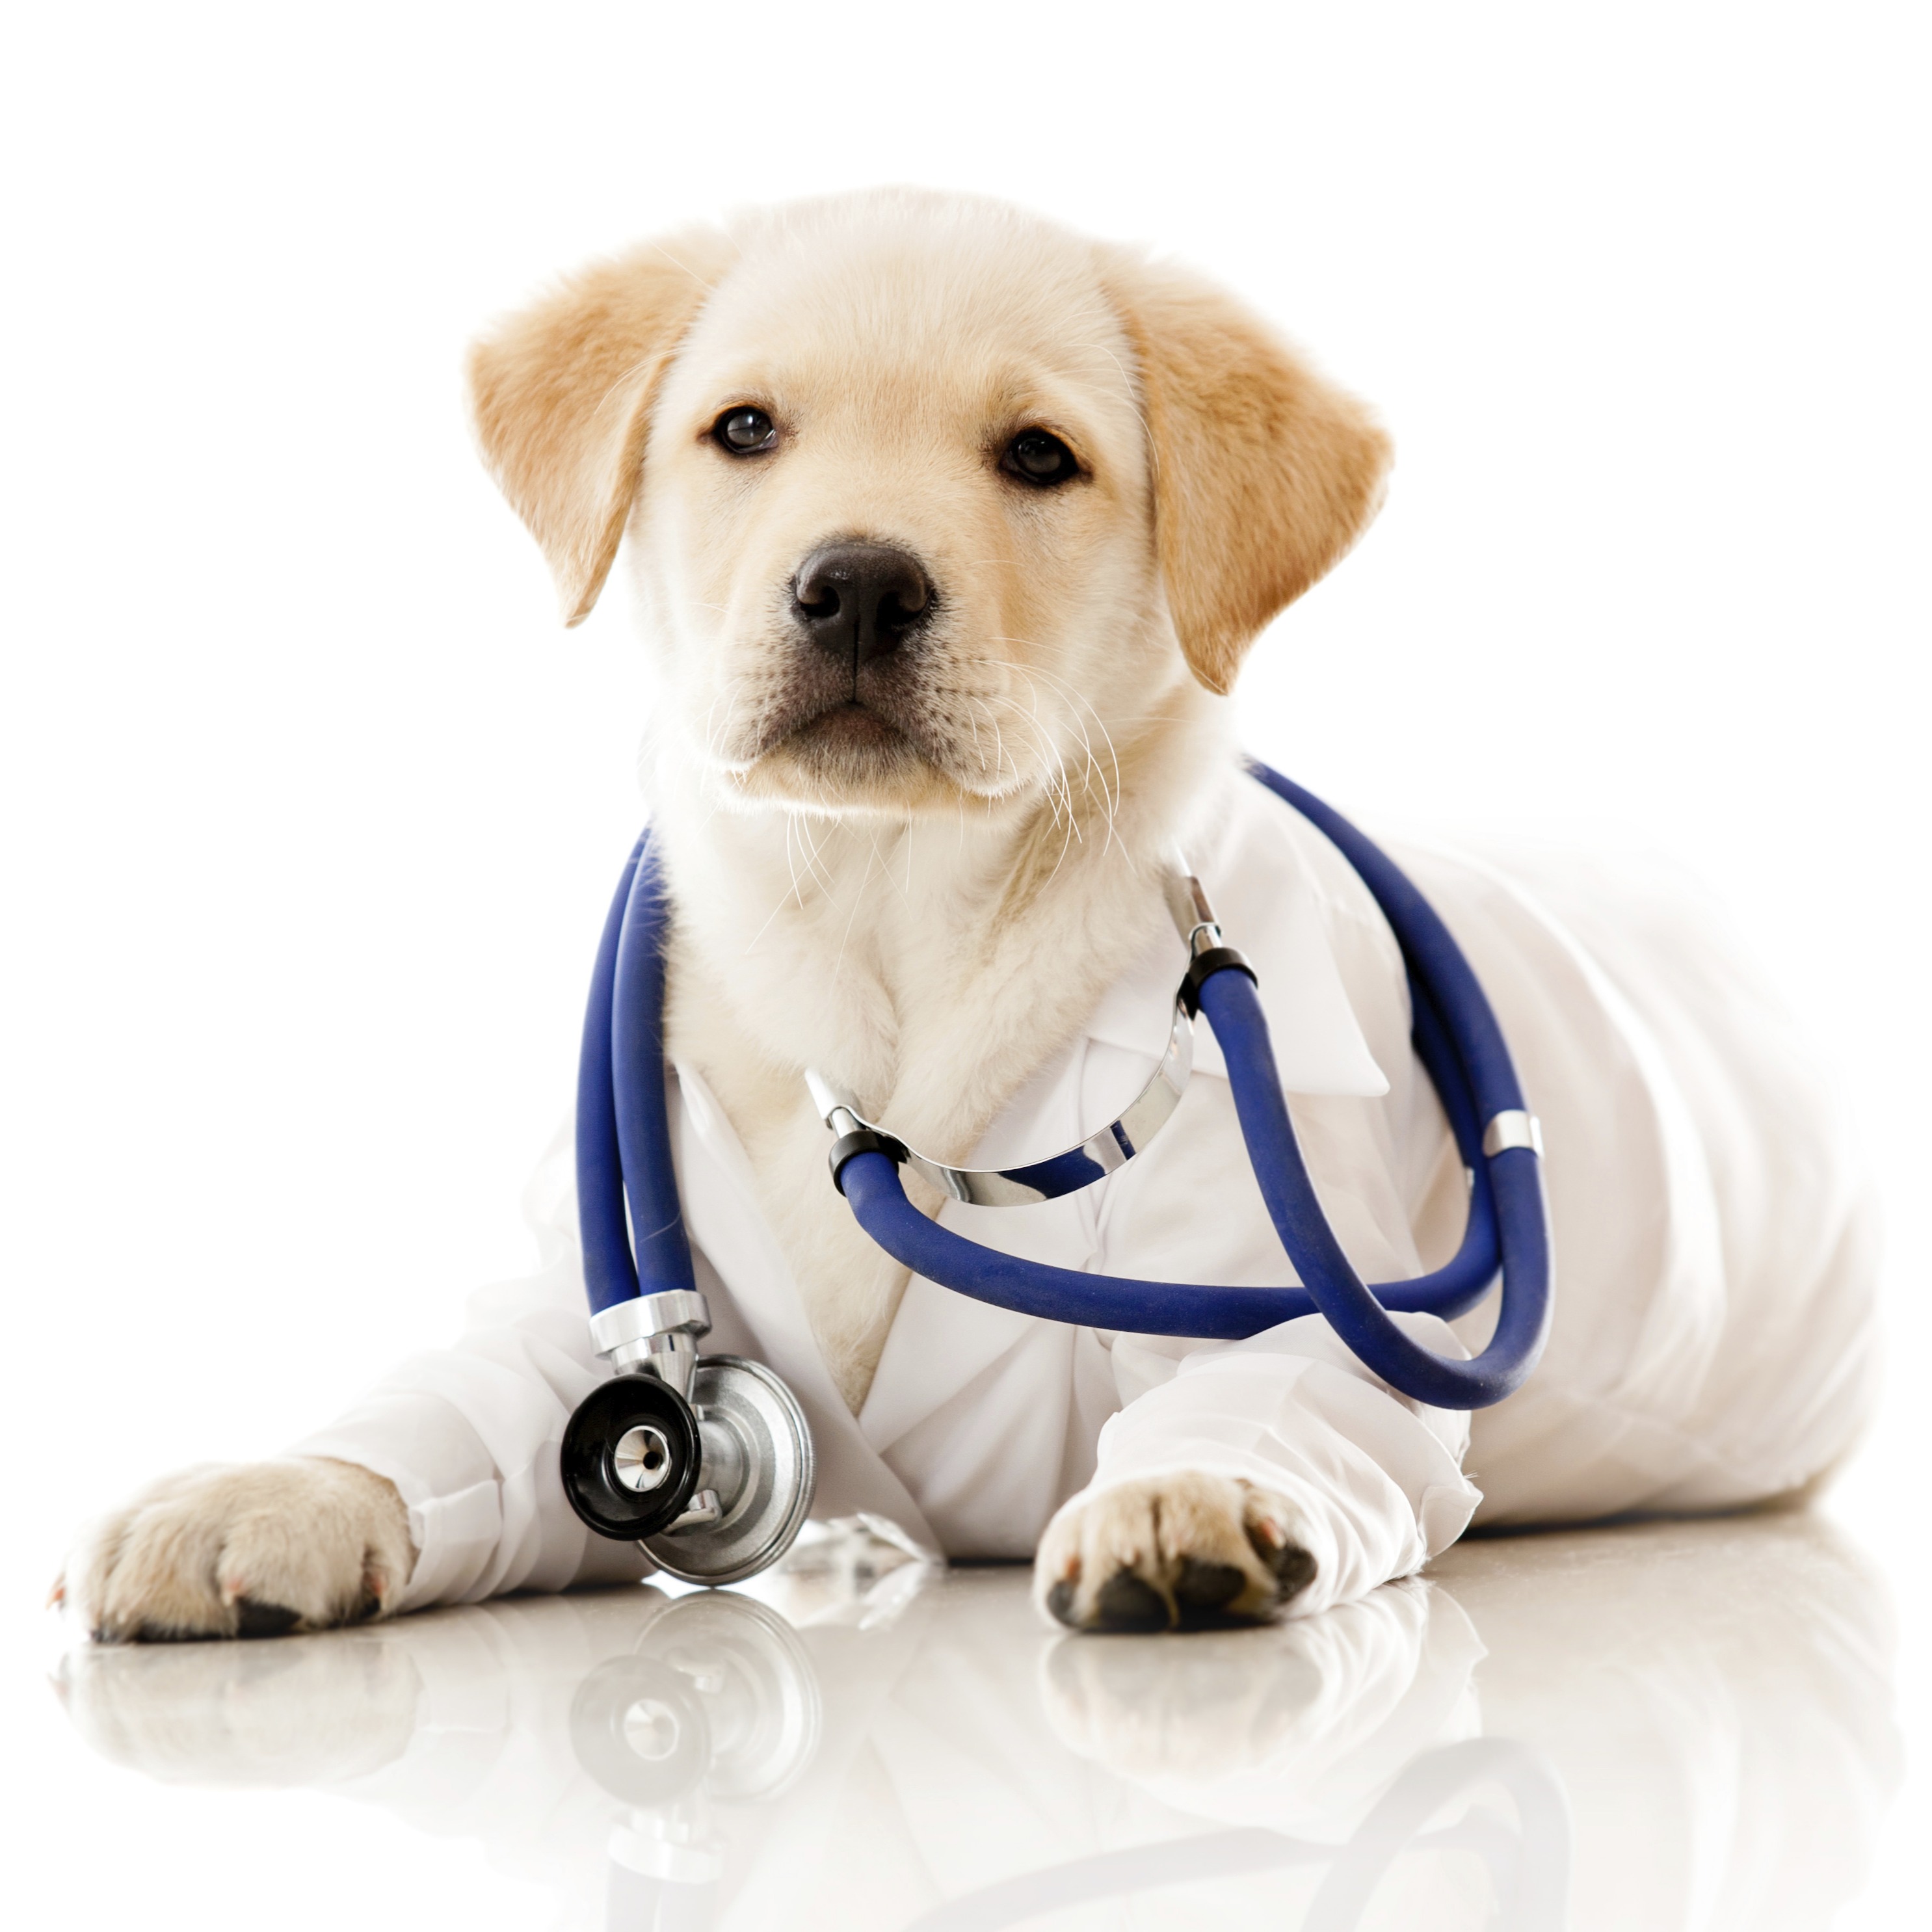 At PawMed - Veterinary Urgent Care, we offer walk-ins for minor injuries and illnesses. PawMed - Veterinary Urgent Care Charleston (843)427-3355